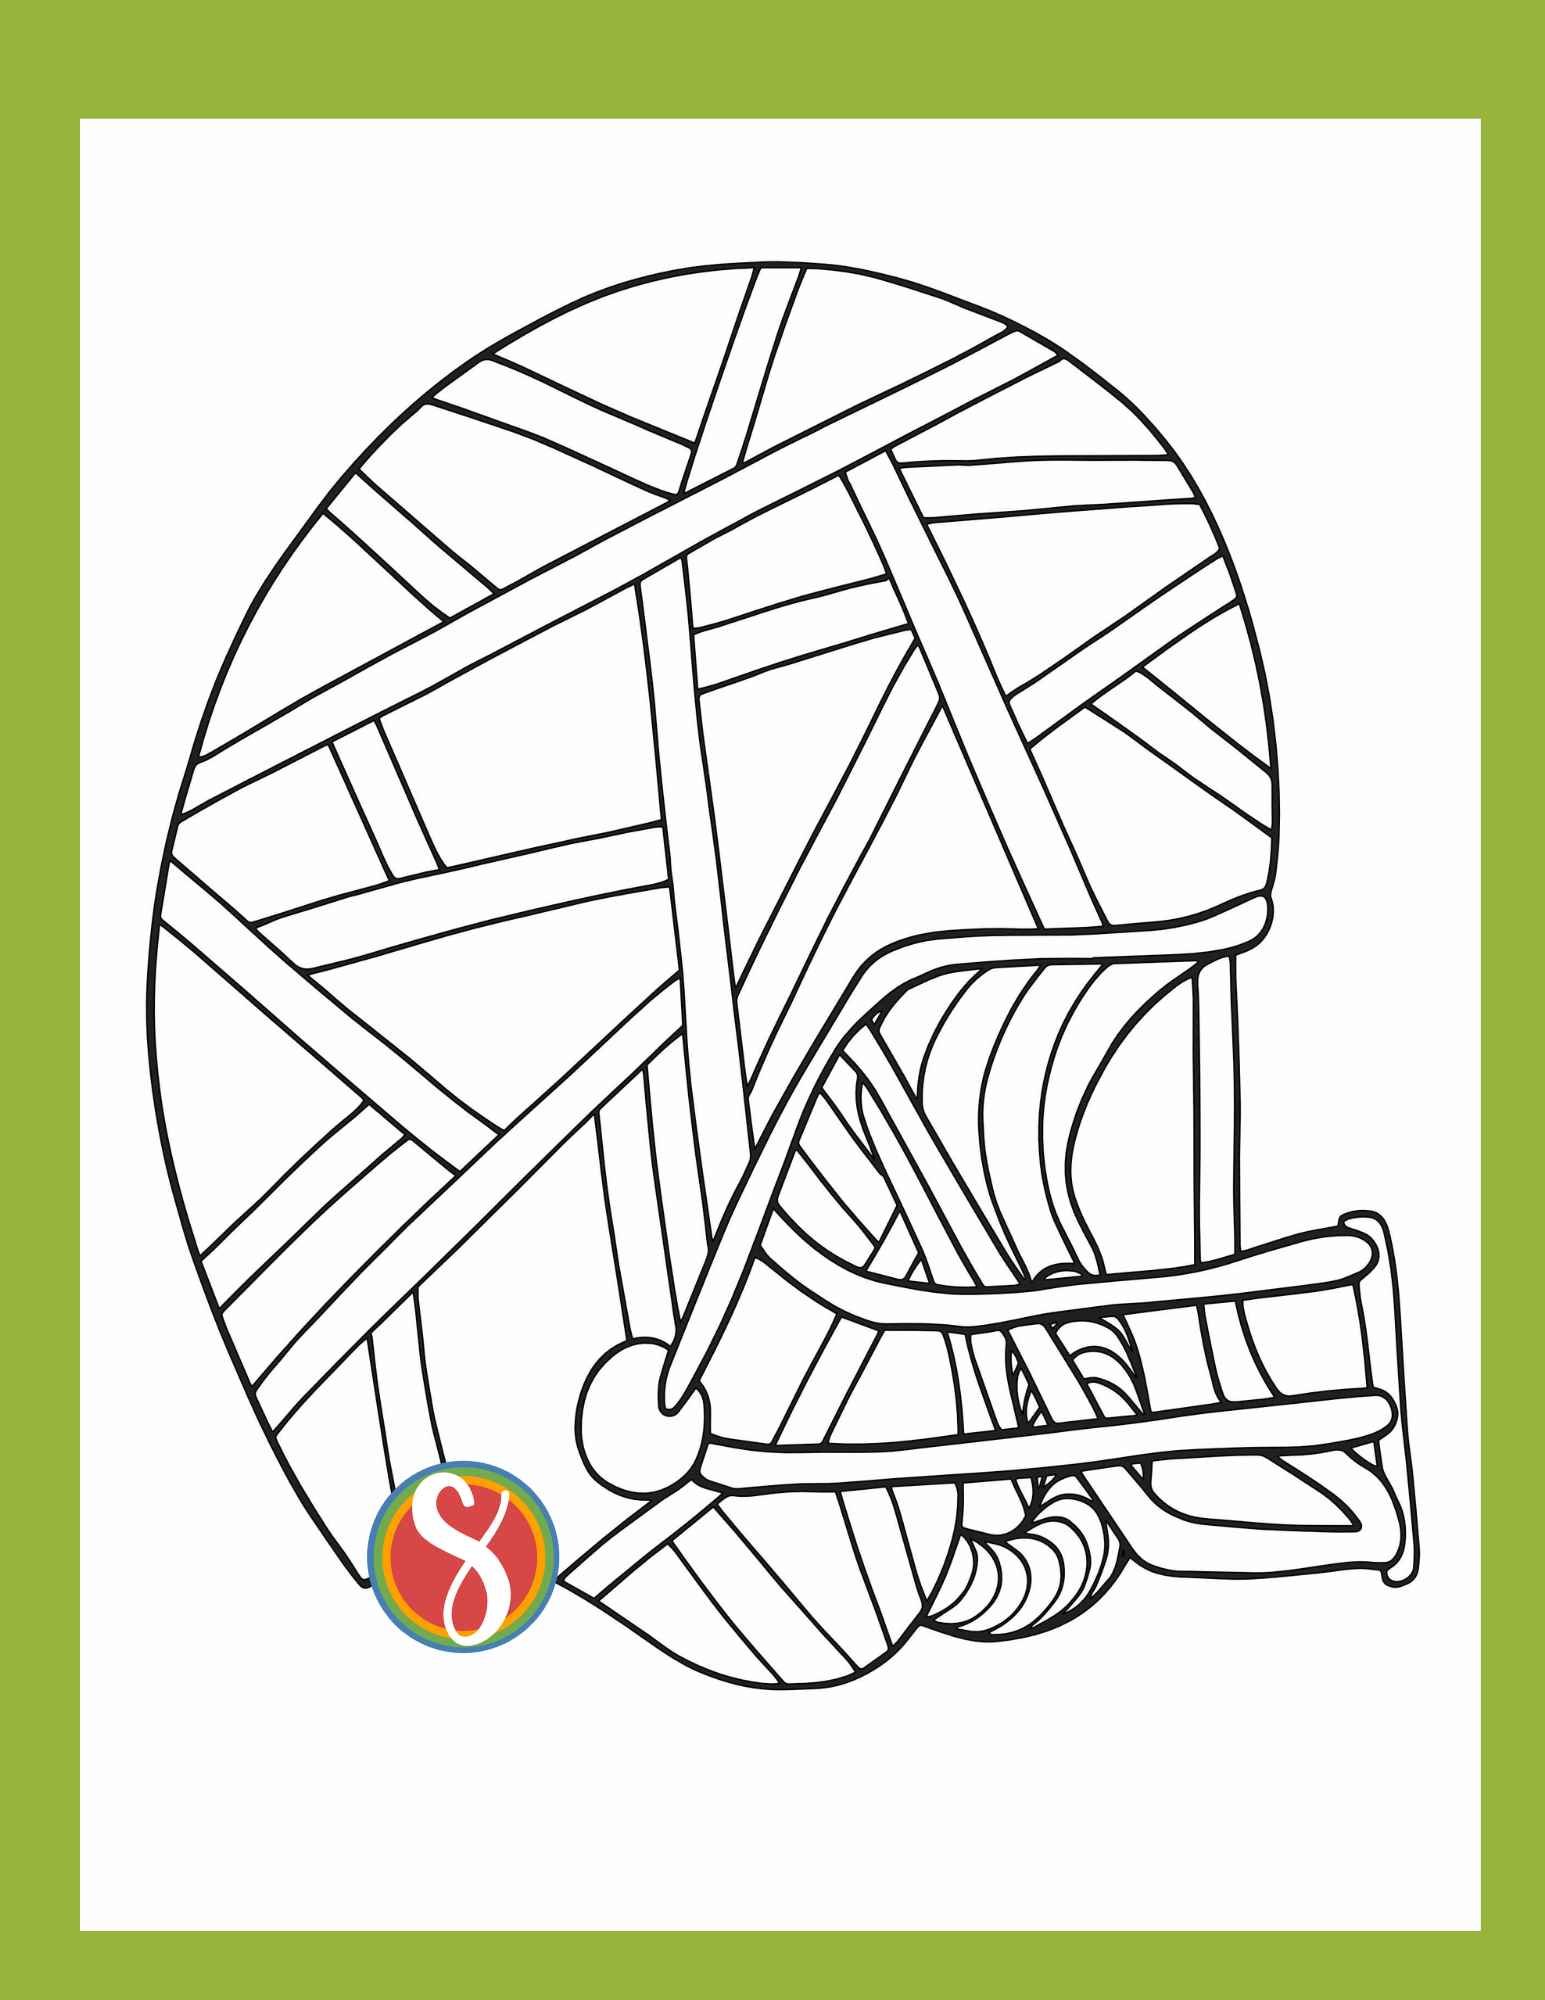 Free football coloring pages â stevie doodles